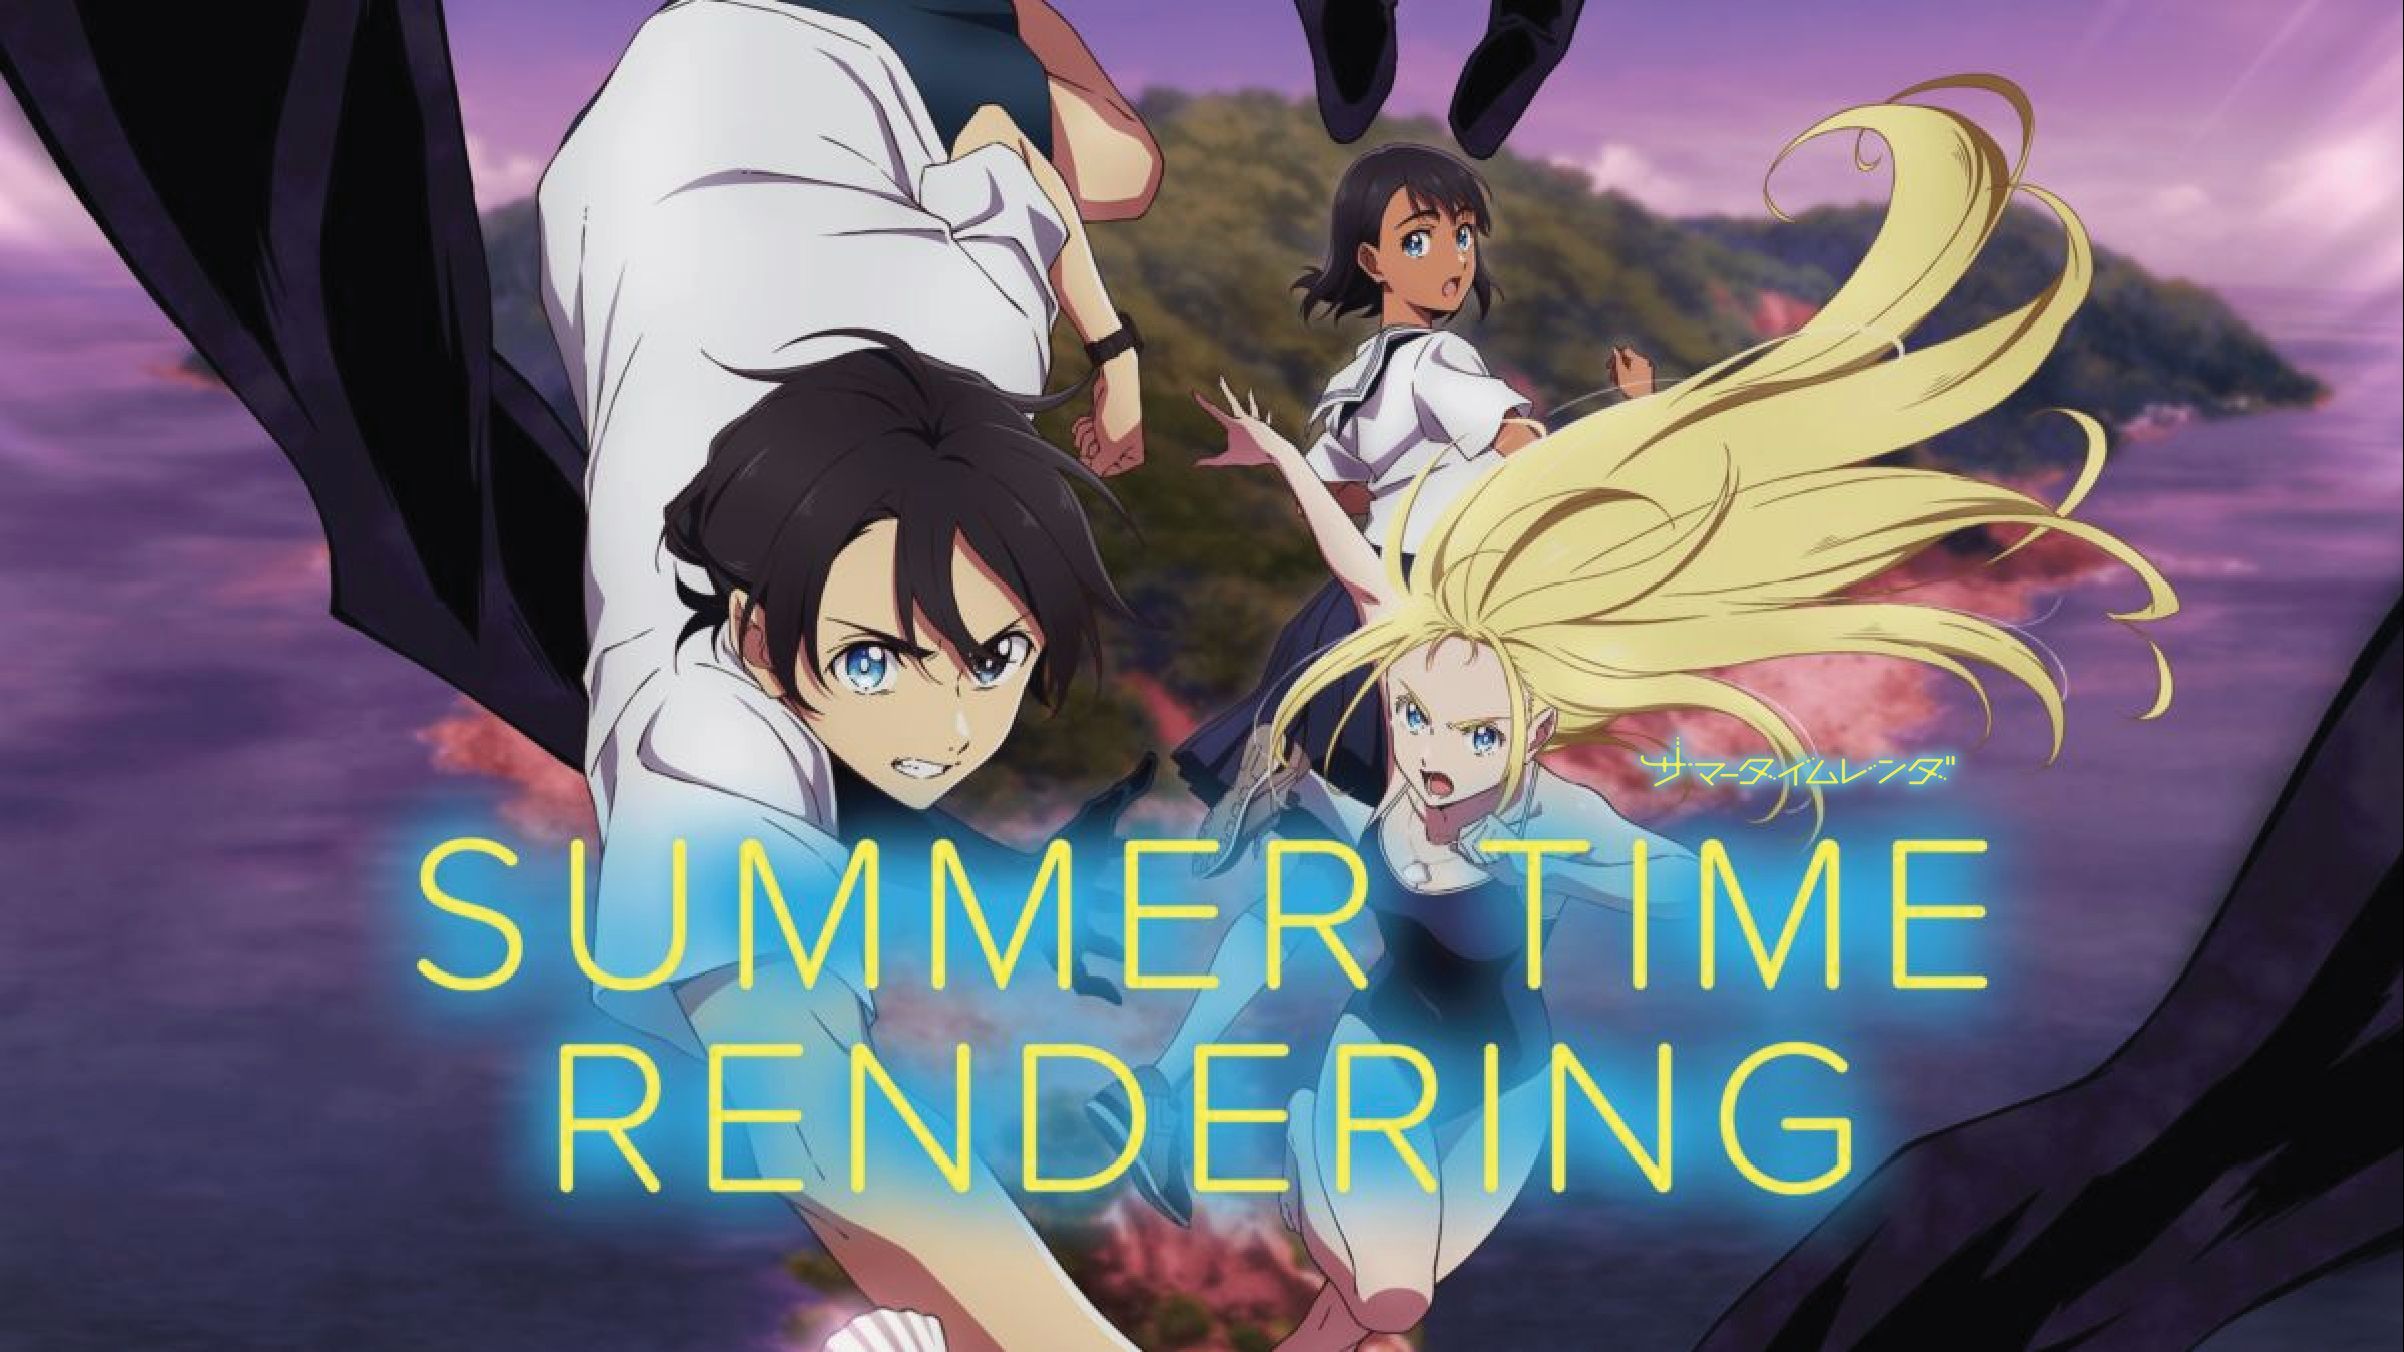 Summer time rendering sub